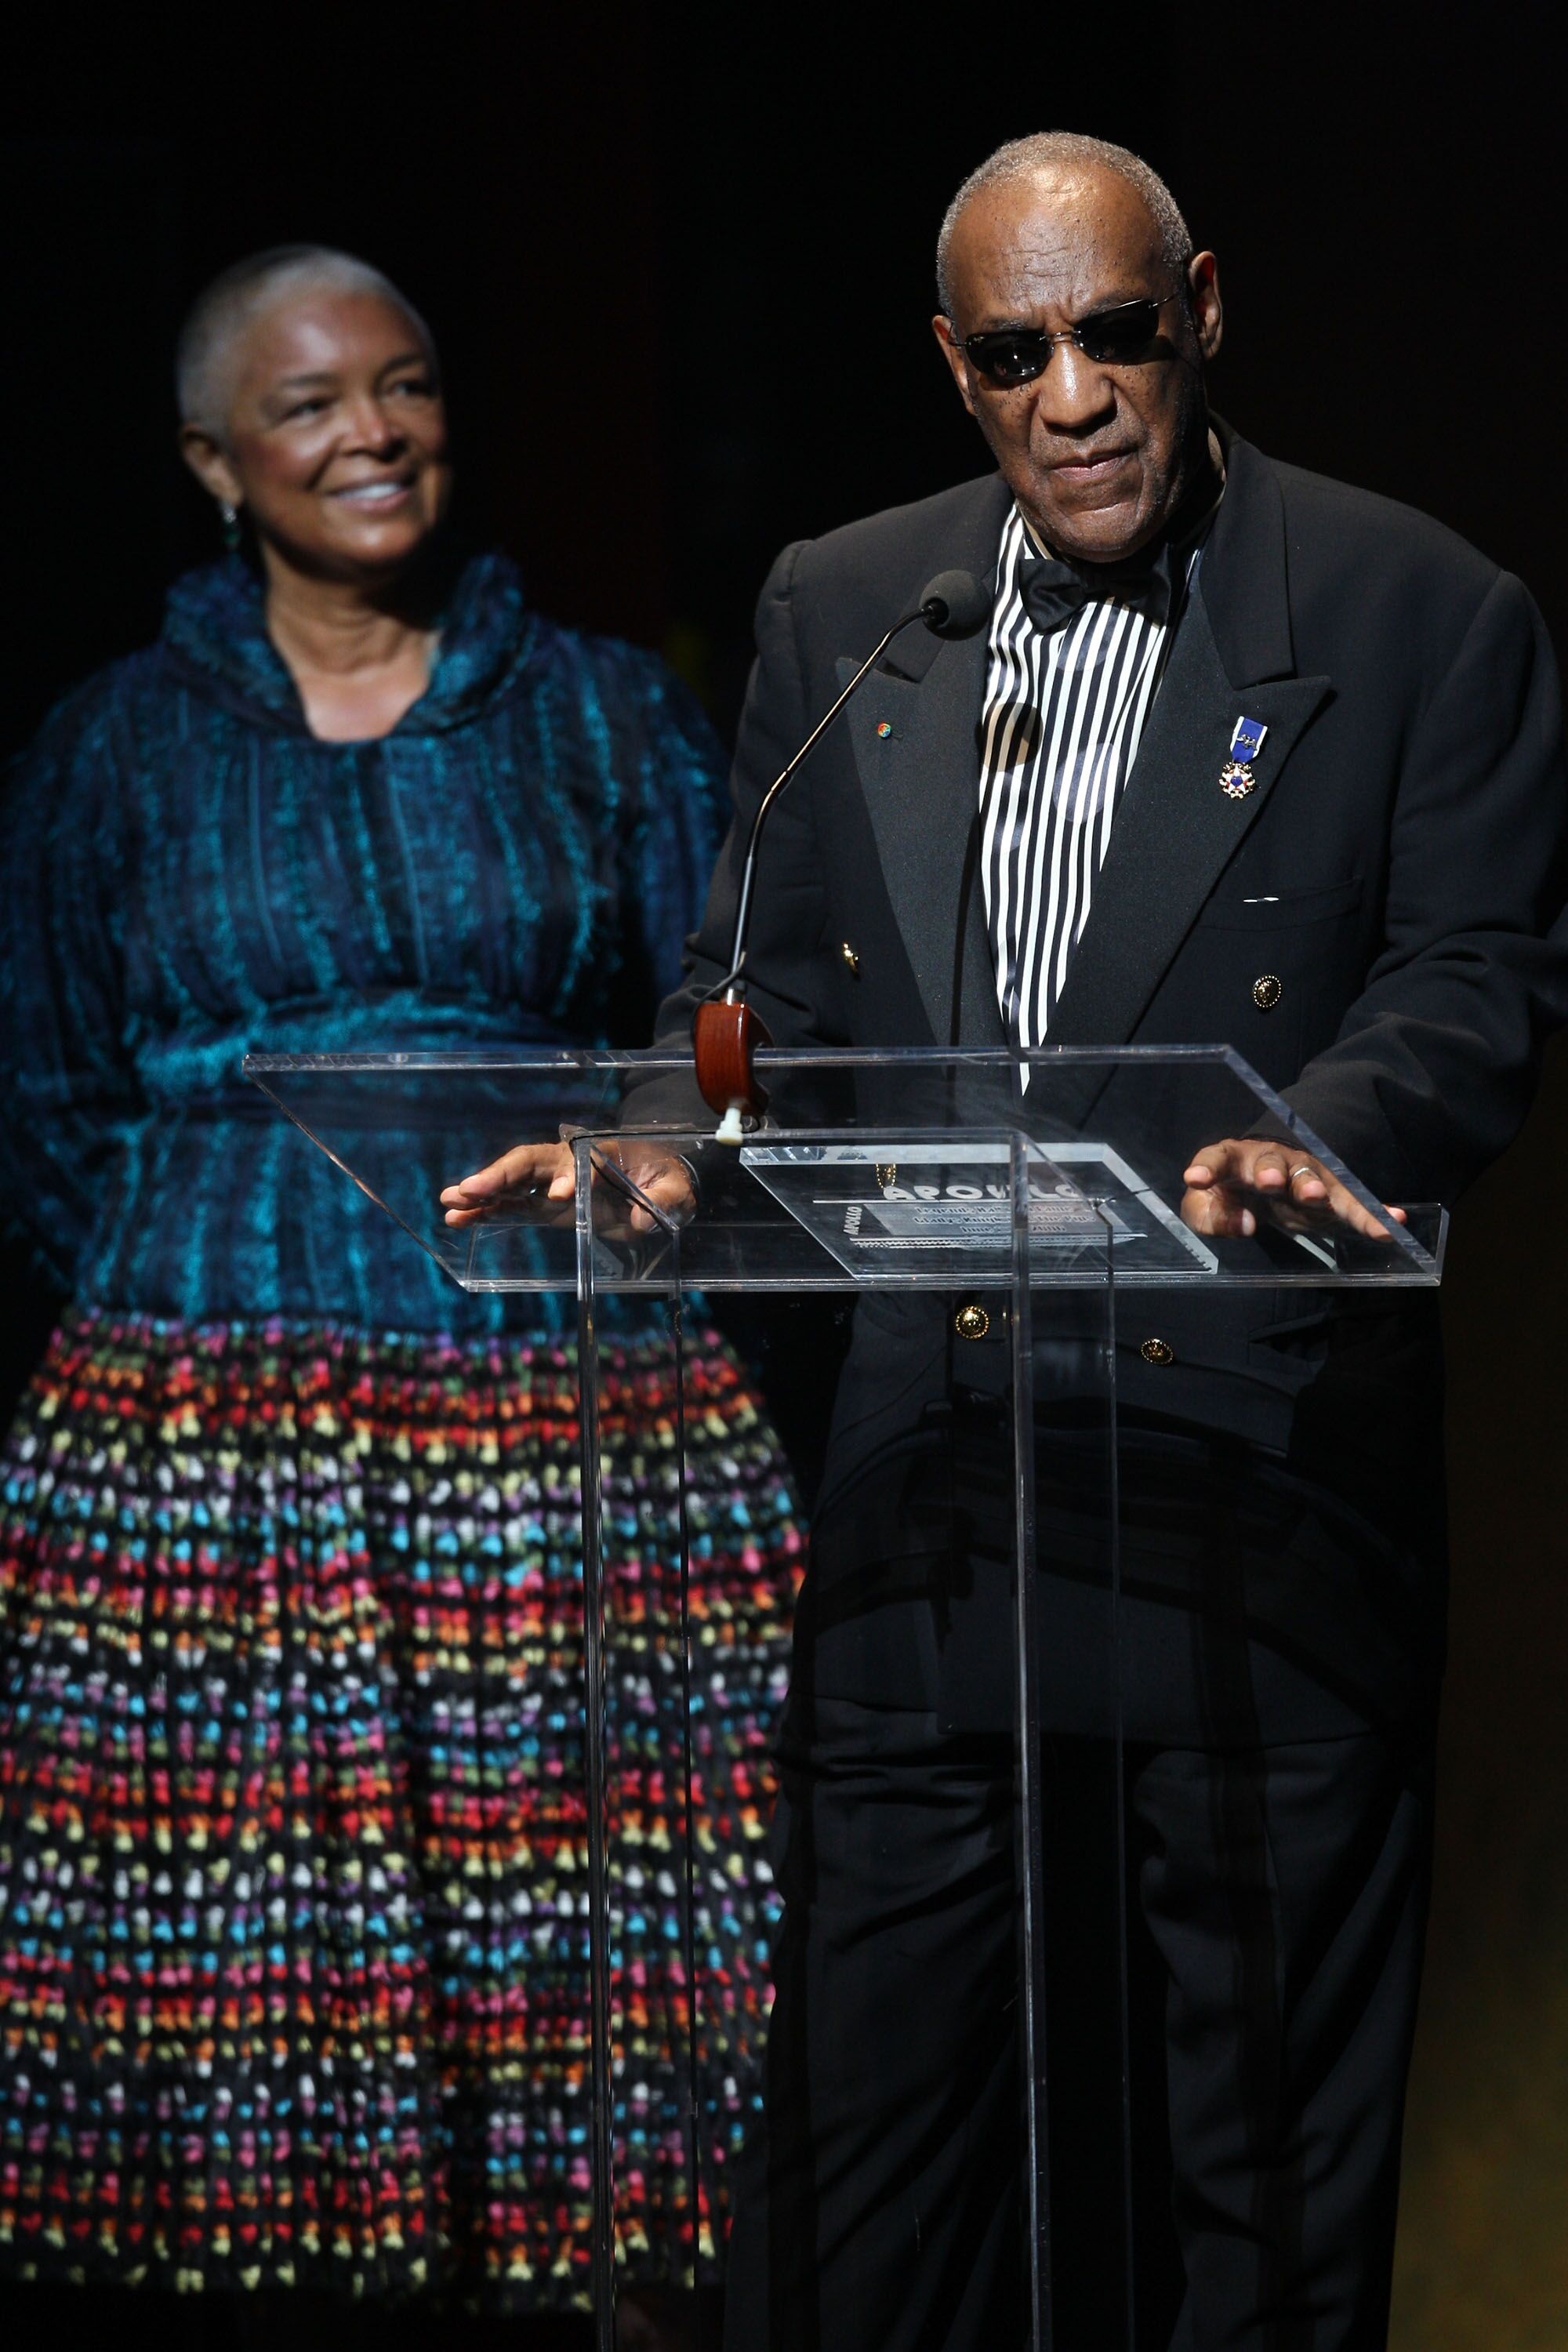 Bill Cosby giving a speech as wife Camille looks on | Source: Getty Images